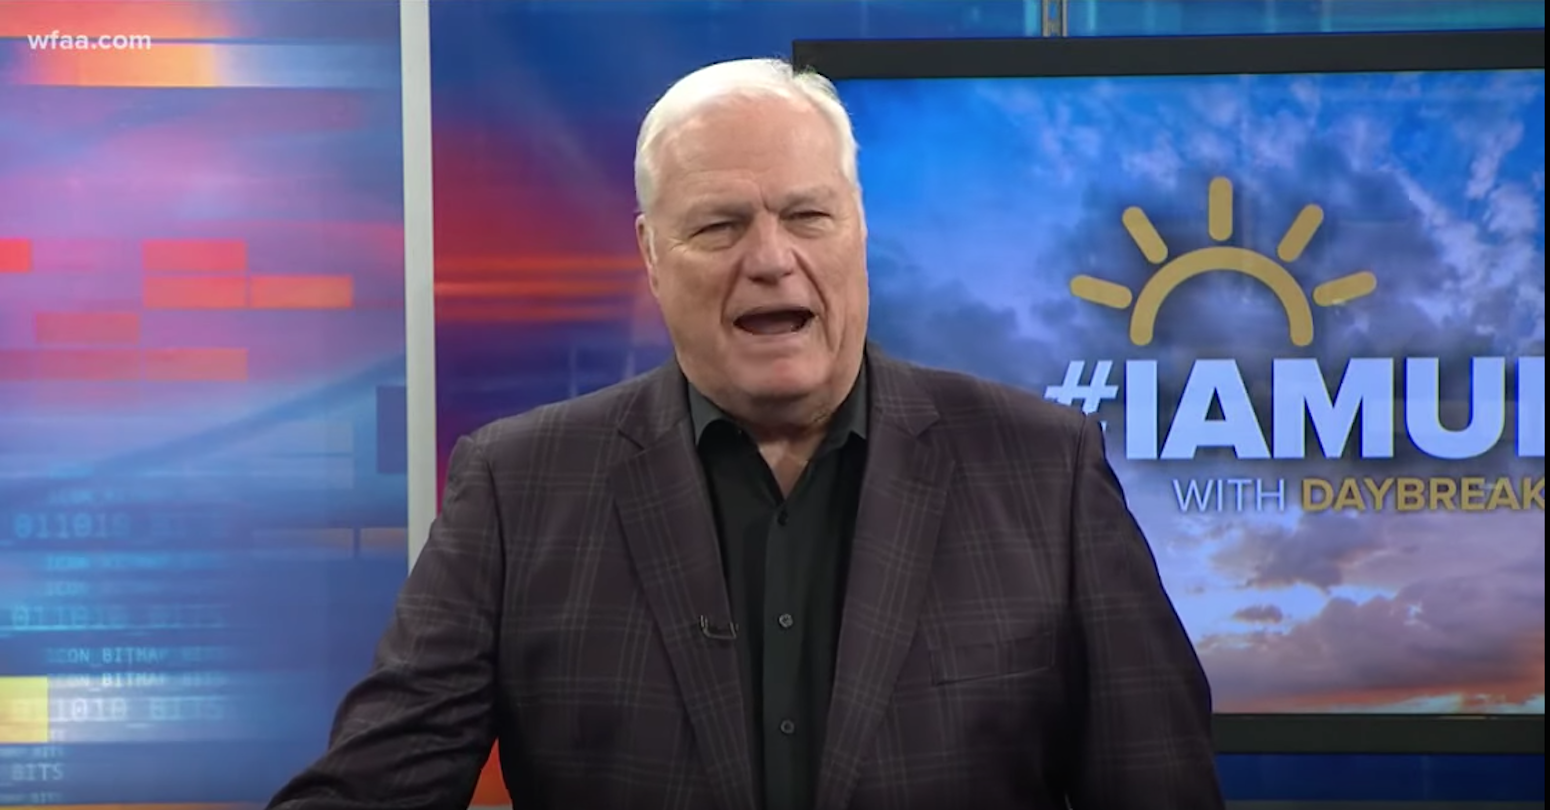 dale hansen unplugged nfl players protest